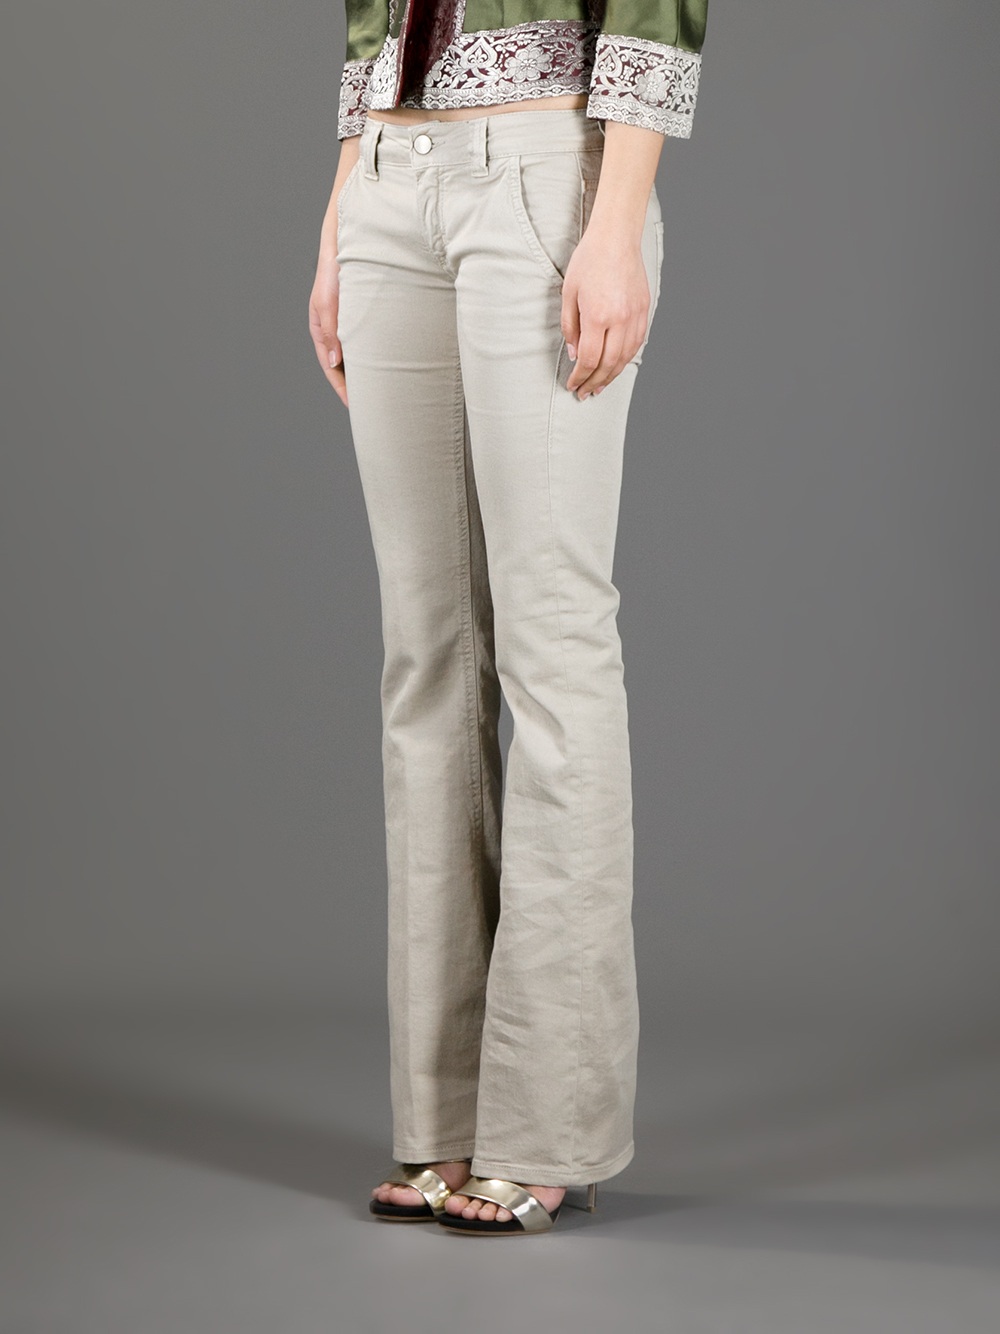 Dondup Bootcut Jean in Beige (Natural) - Lyst